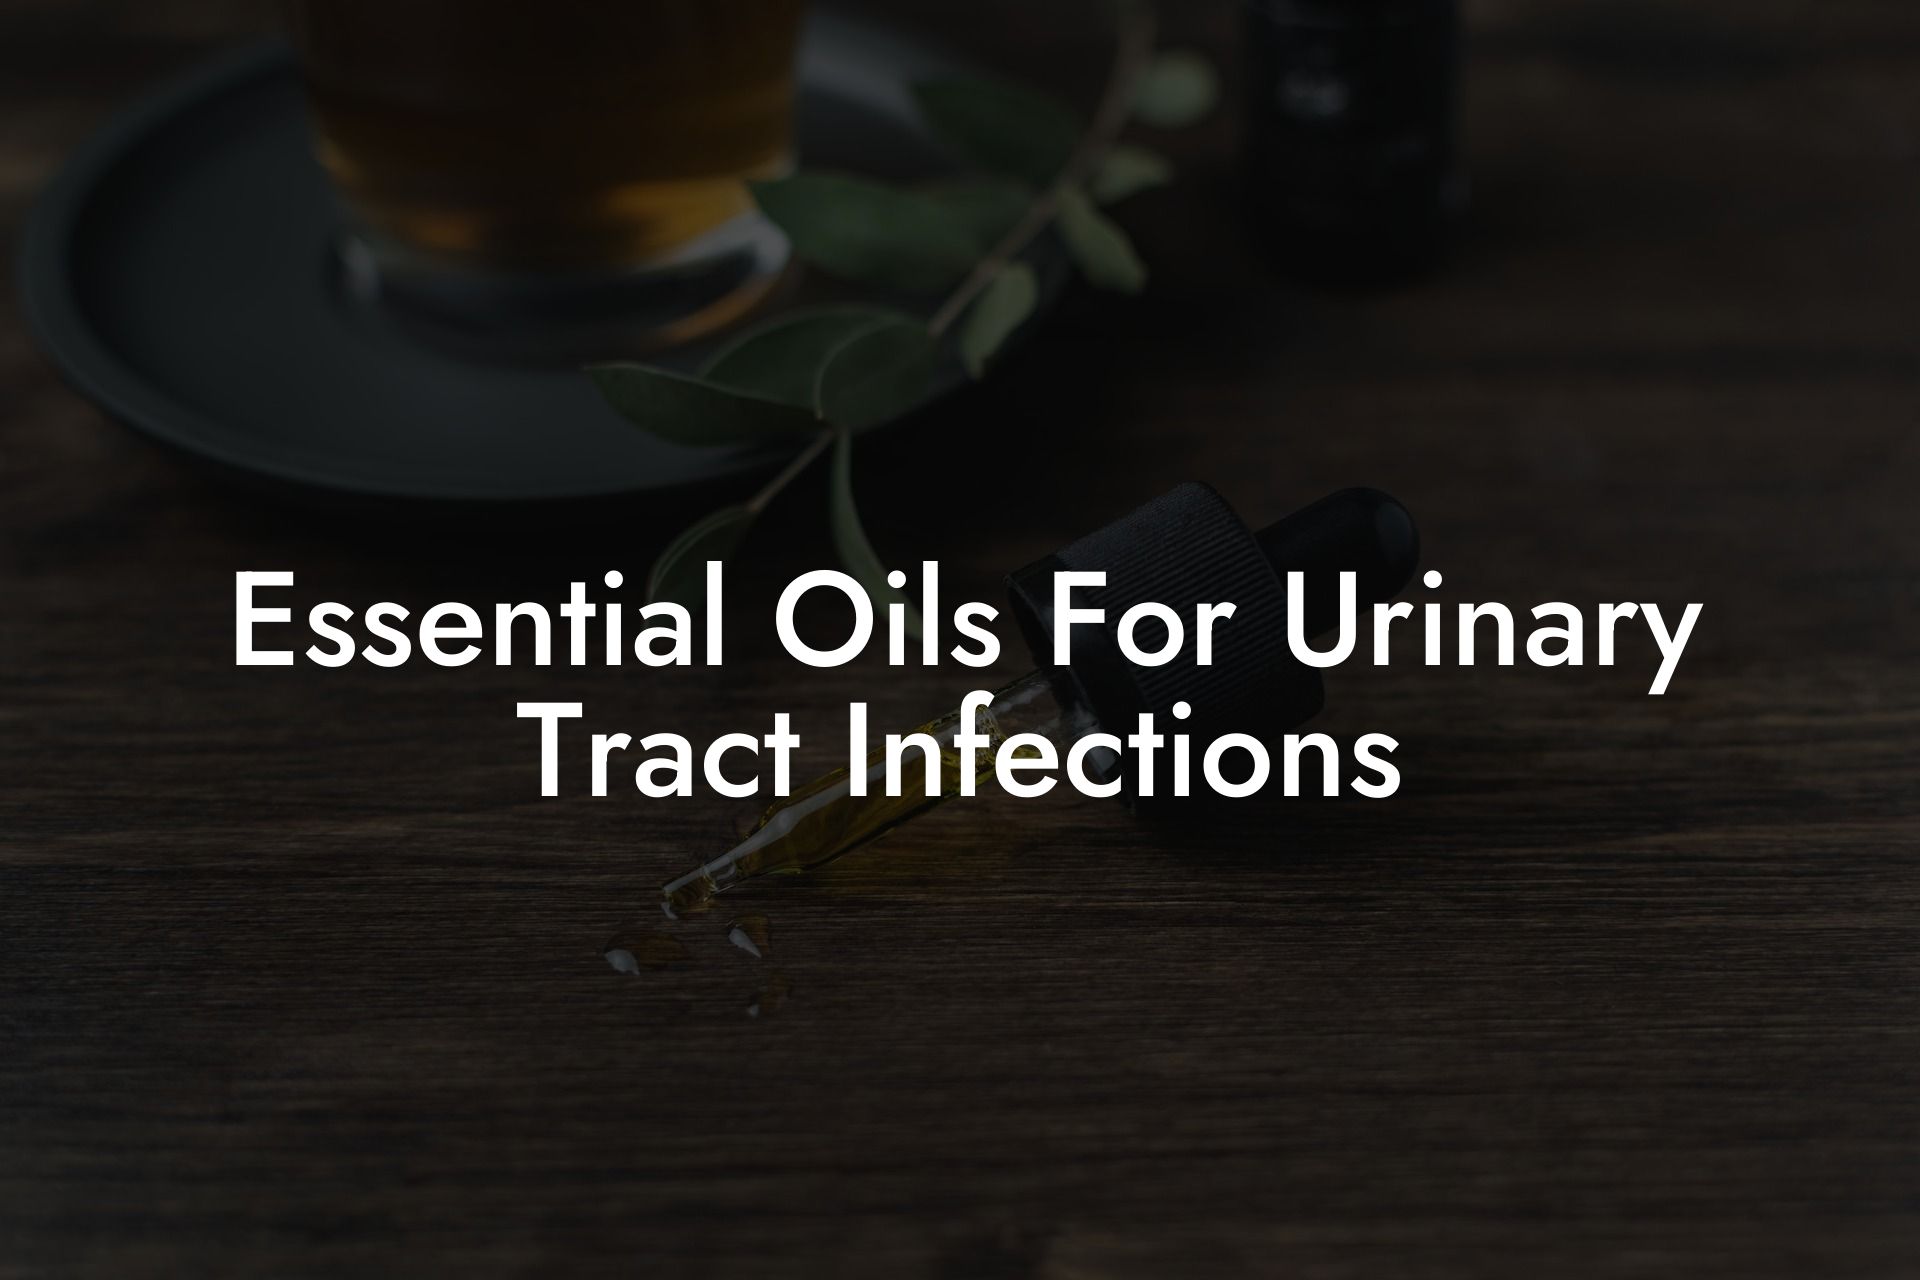 Essential Oils For Urinary Tract Infections